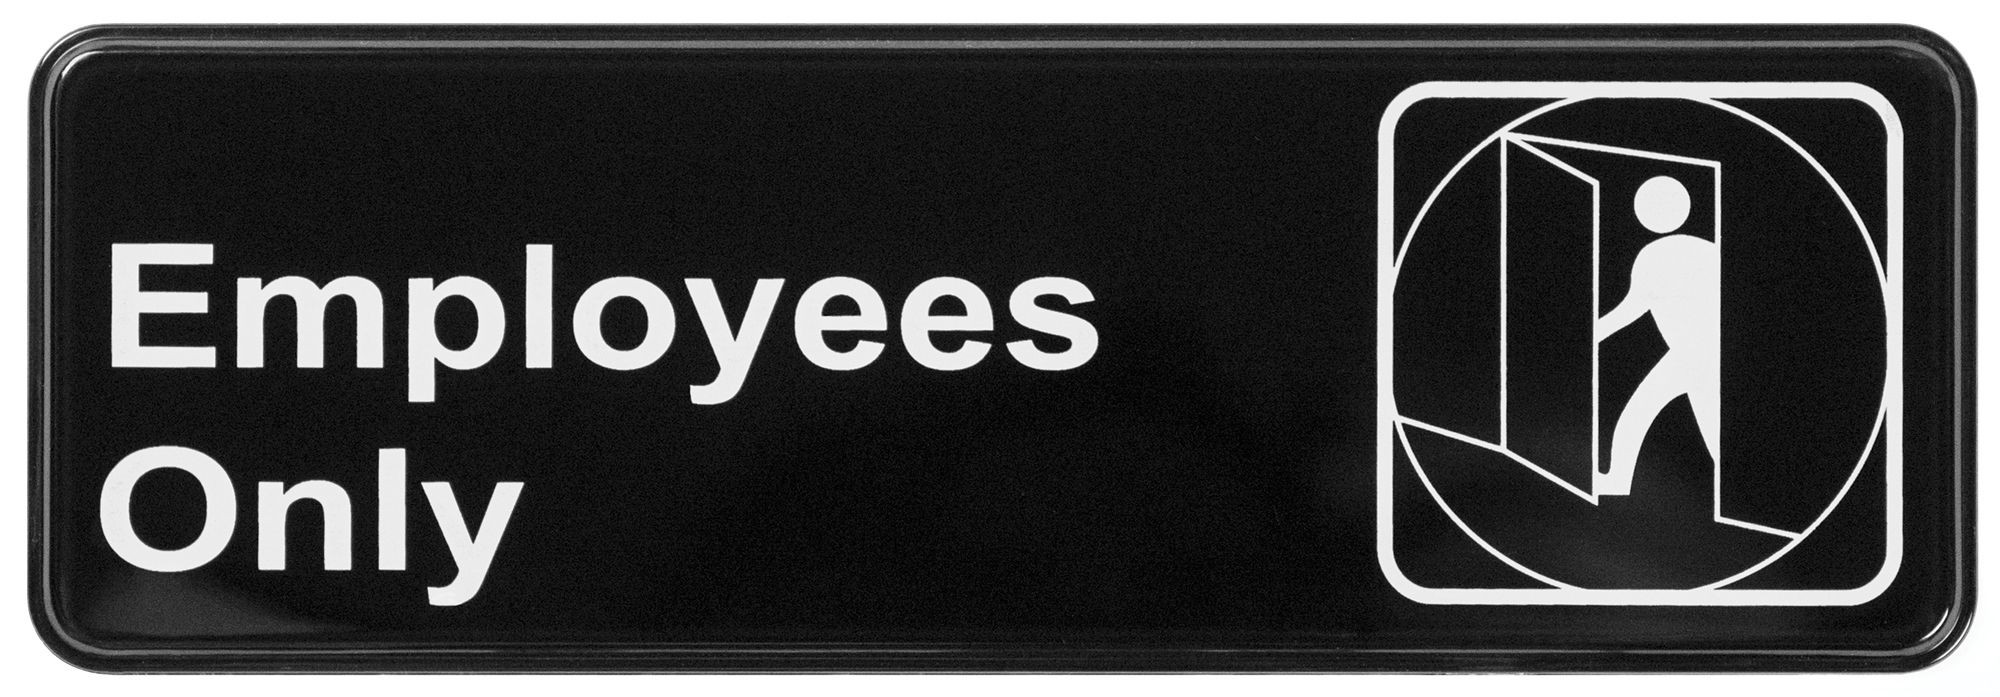 Winco SGN-305 "Employees Only" Informational Sign, 9" x 3"